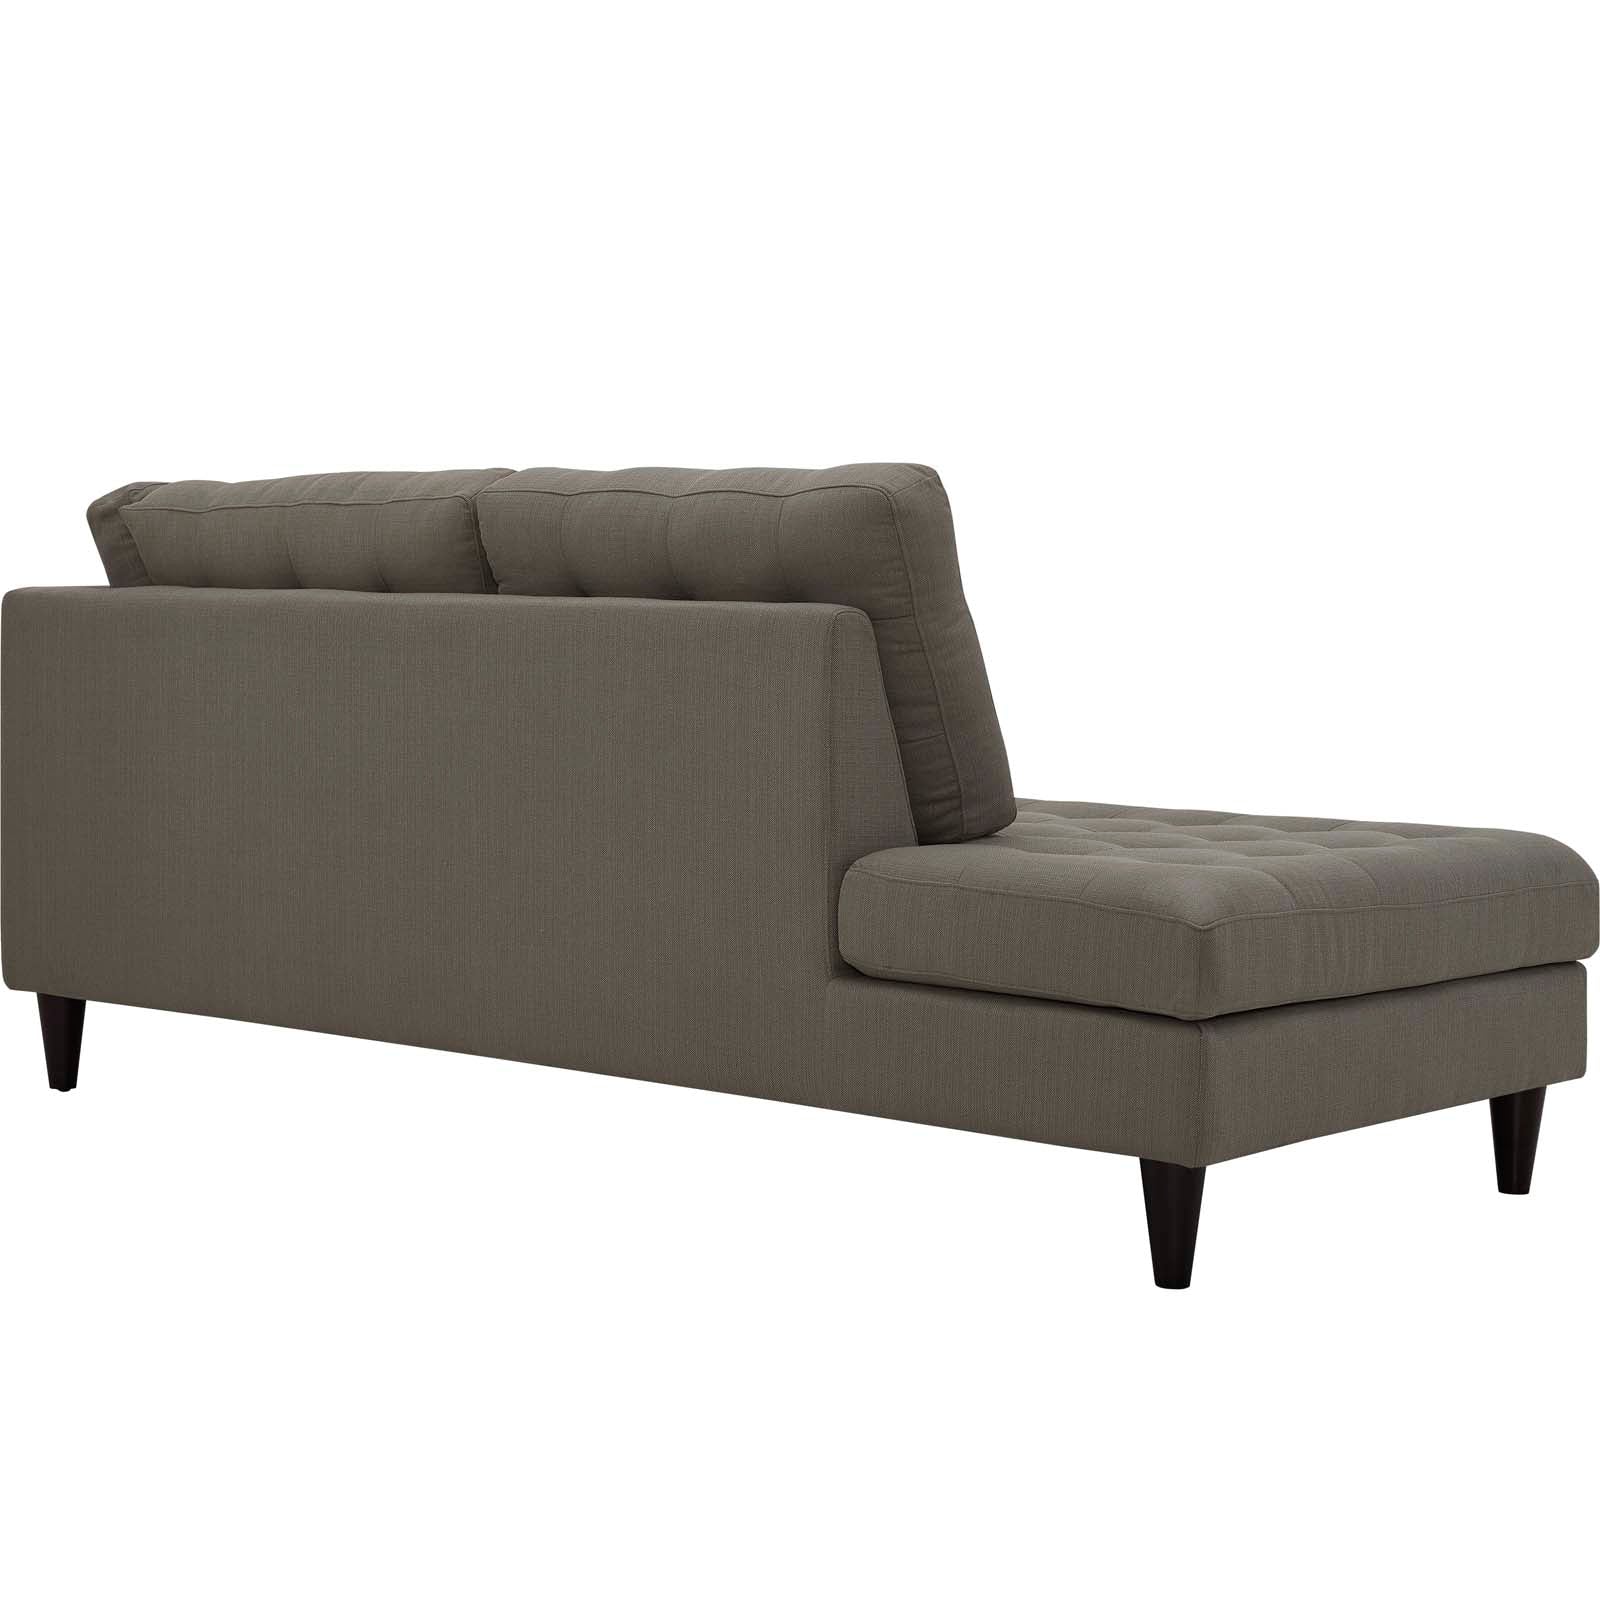 Modway Sectional Sofas - Empress Upholstered Fabric Left Facing Bumper Granite